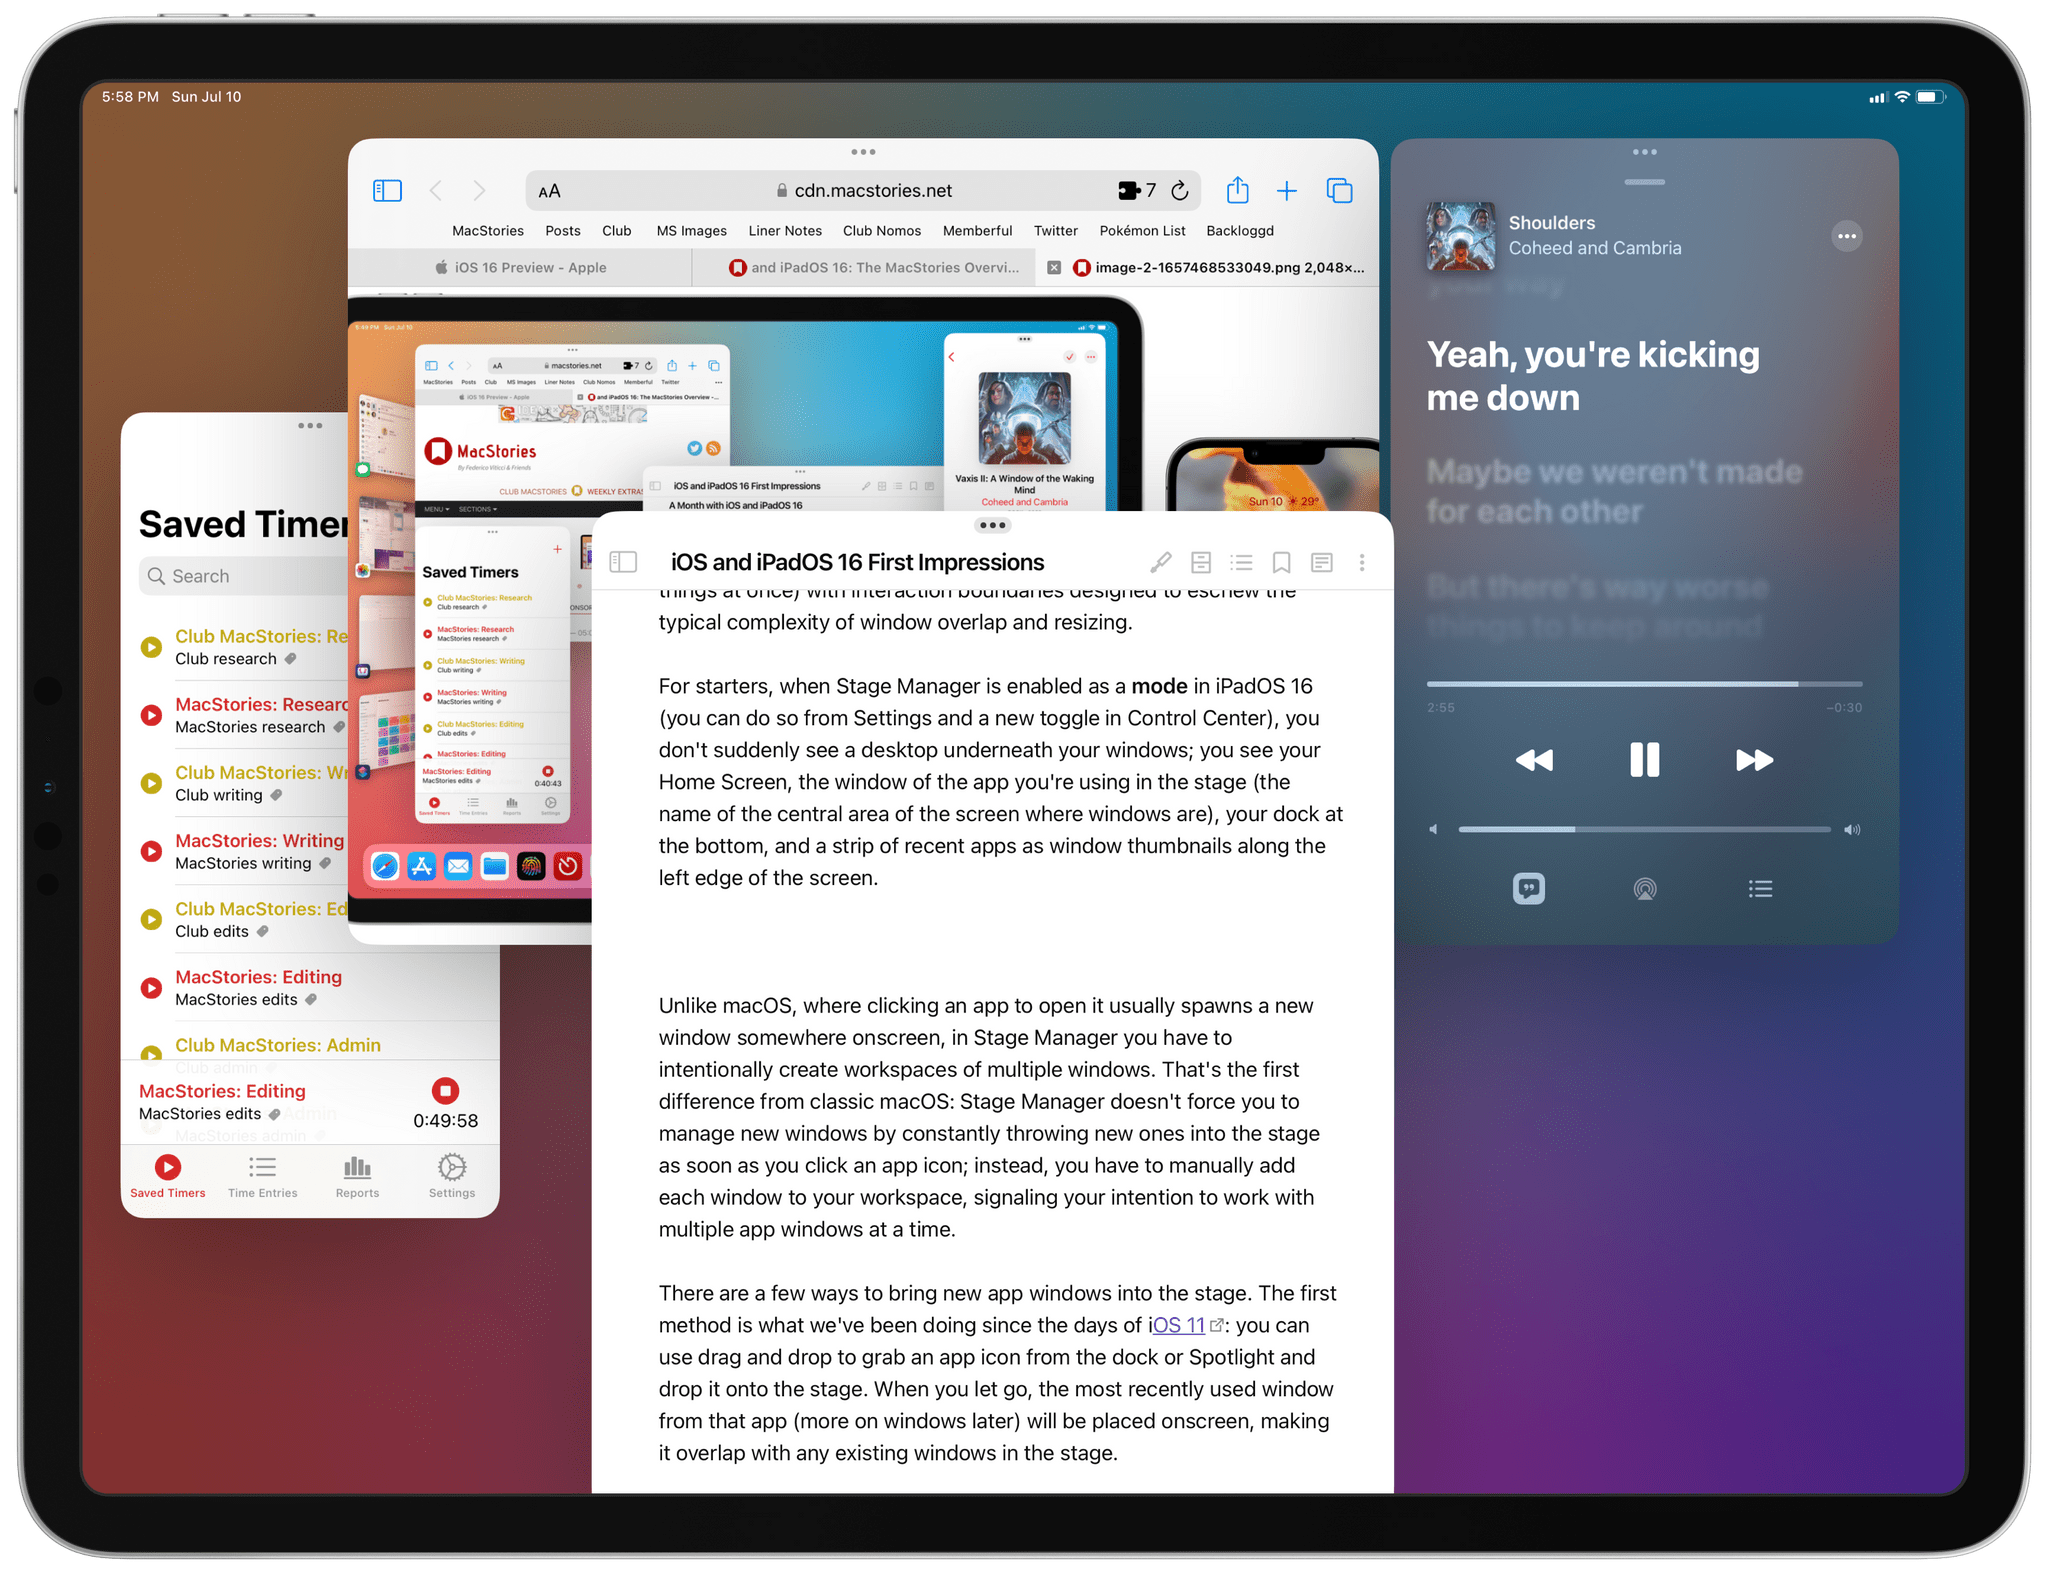 If you want, you can hide the dock and strip from Control Center. In that case, Stage Manager will only show you windows. You can still bump with the pointer into the edges of the screen to show them, though.